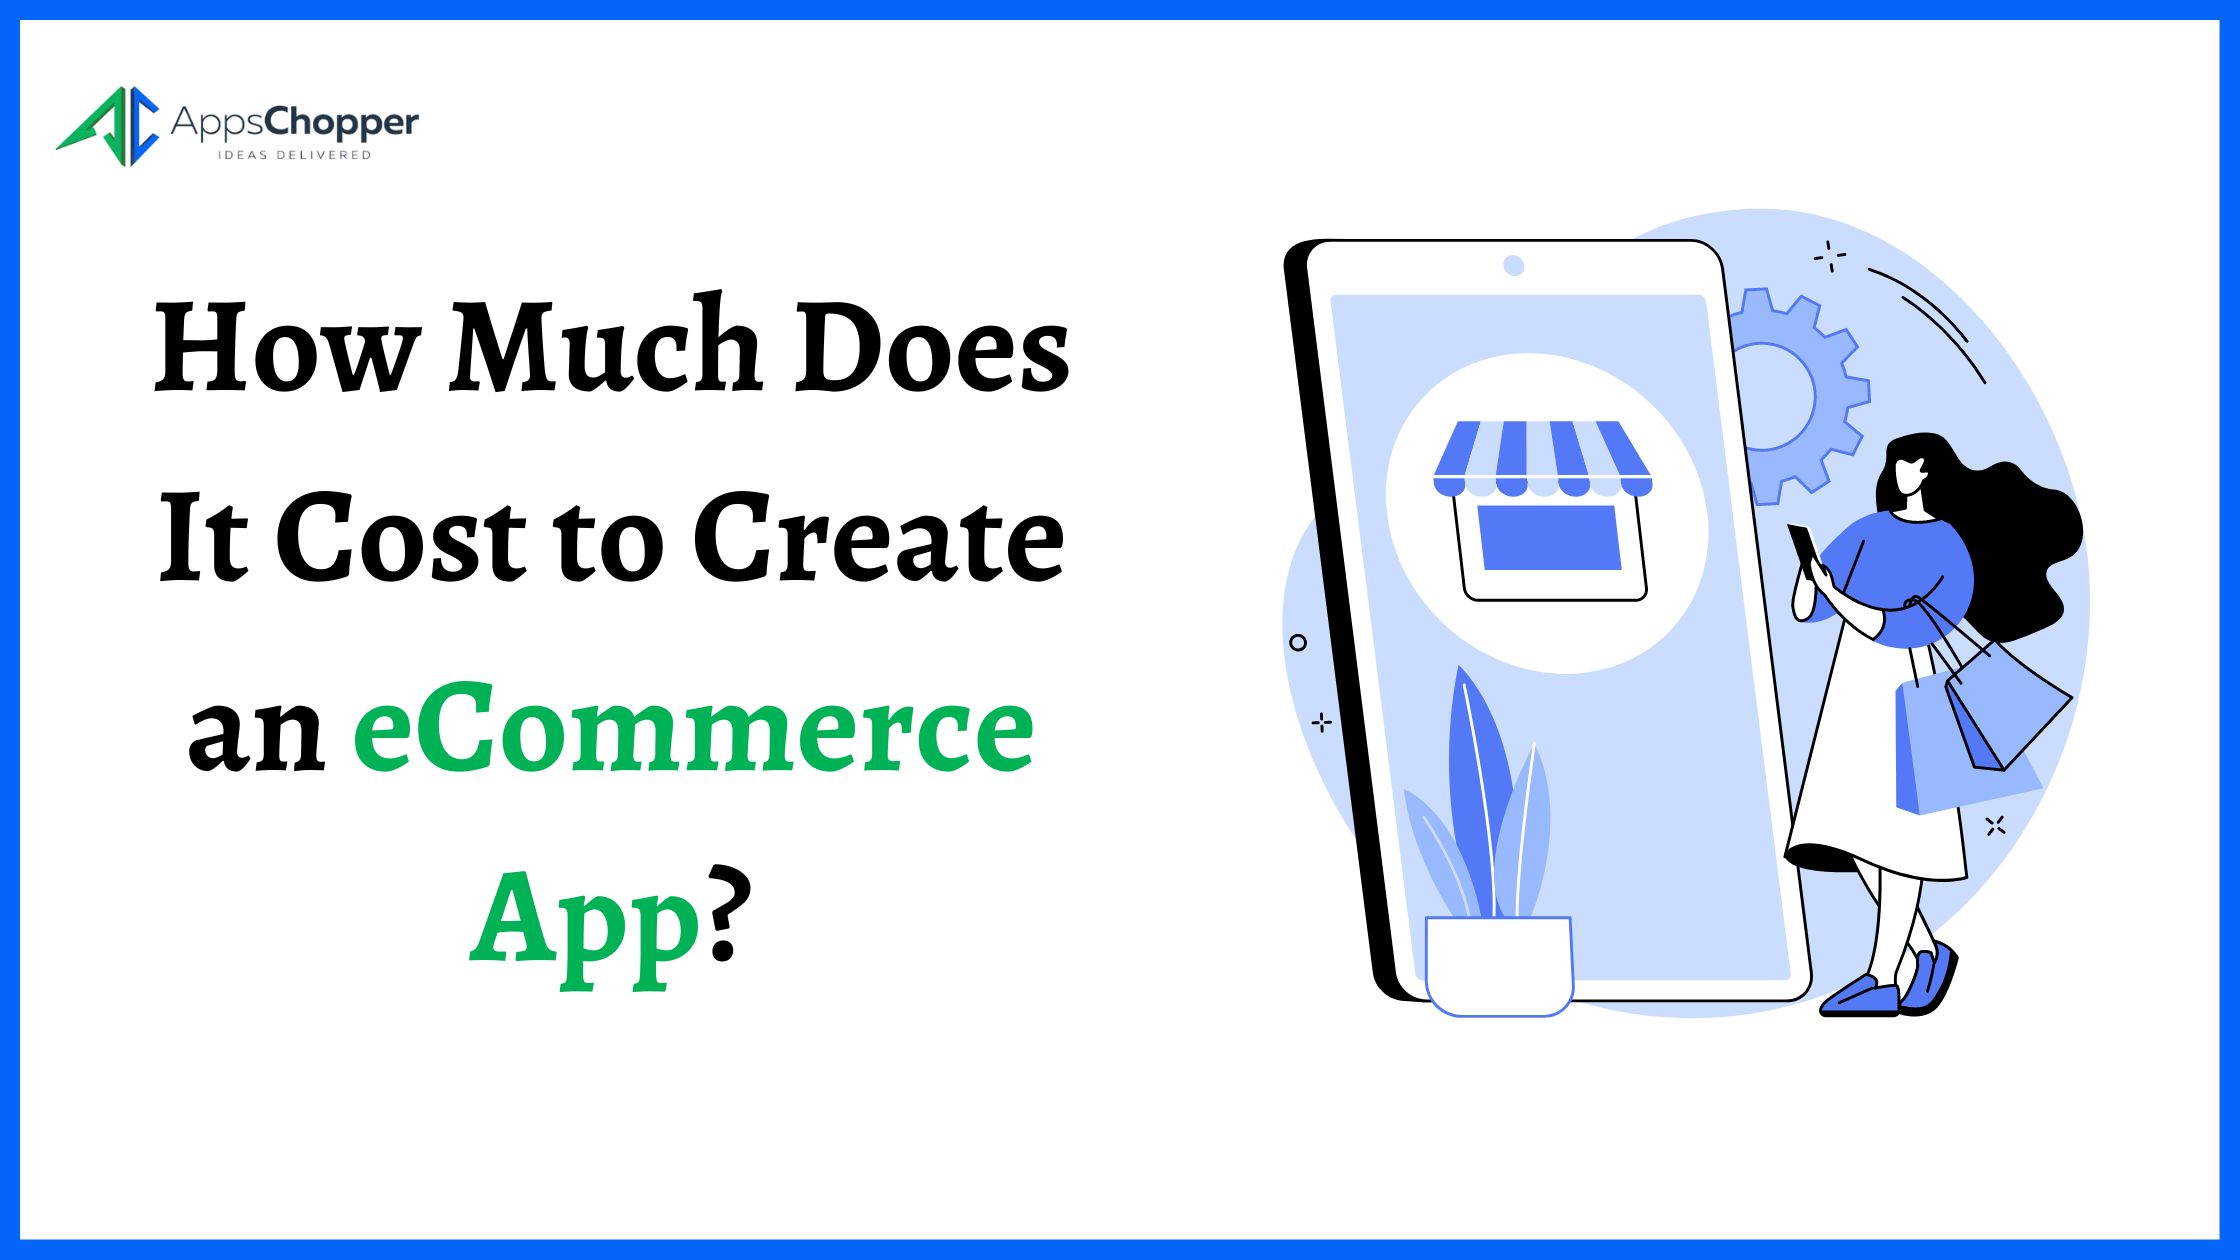 How Much Does It Cost to Create an eCommerce App?